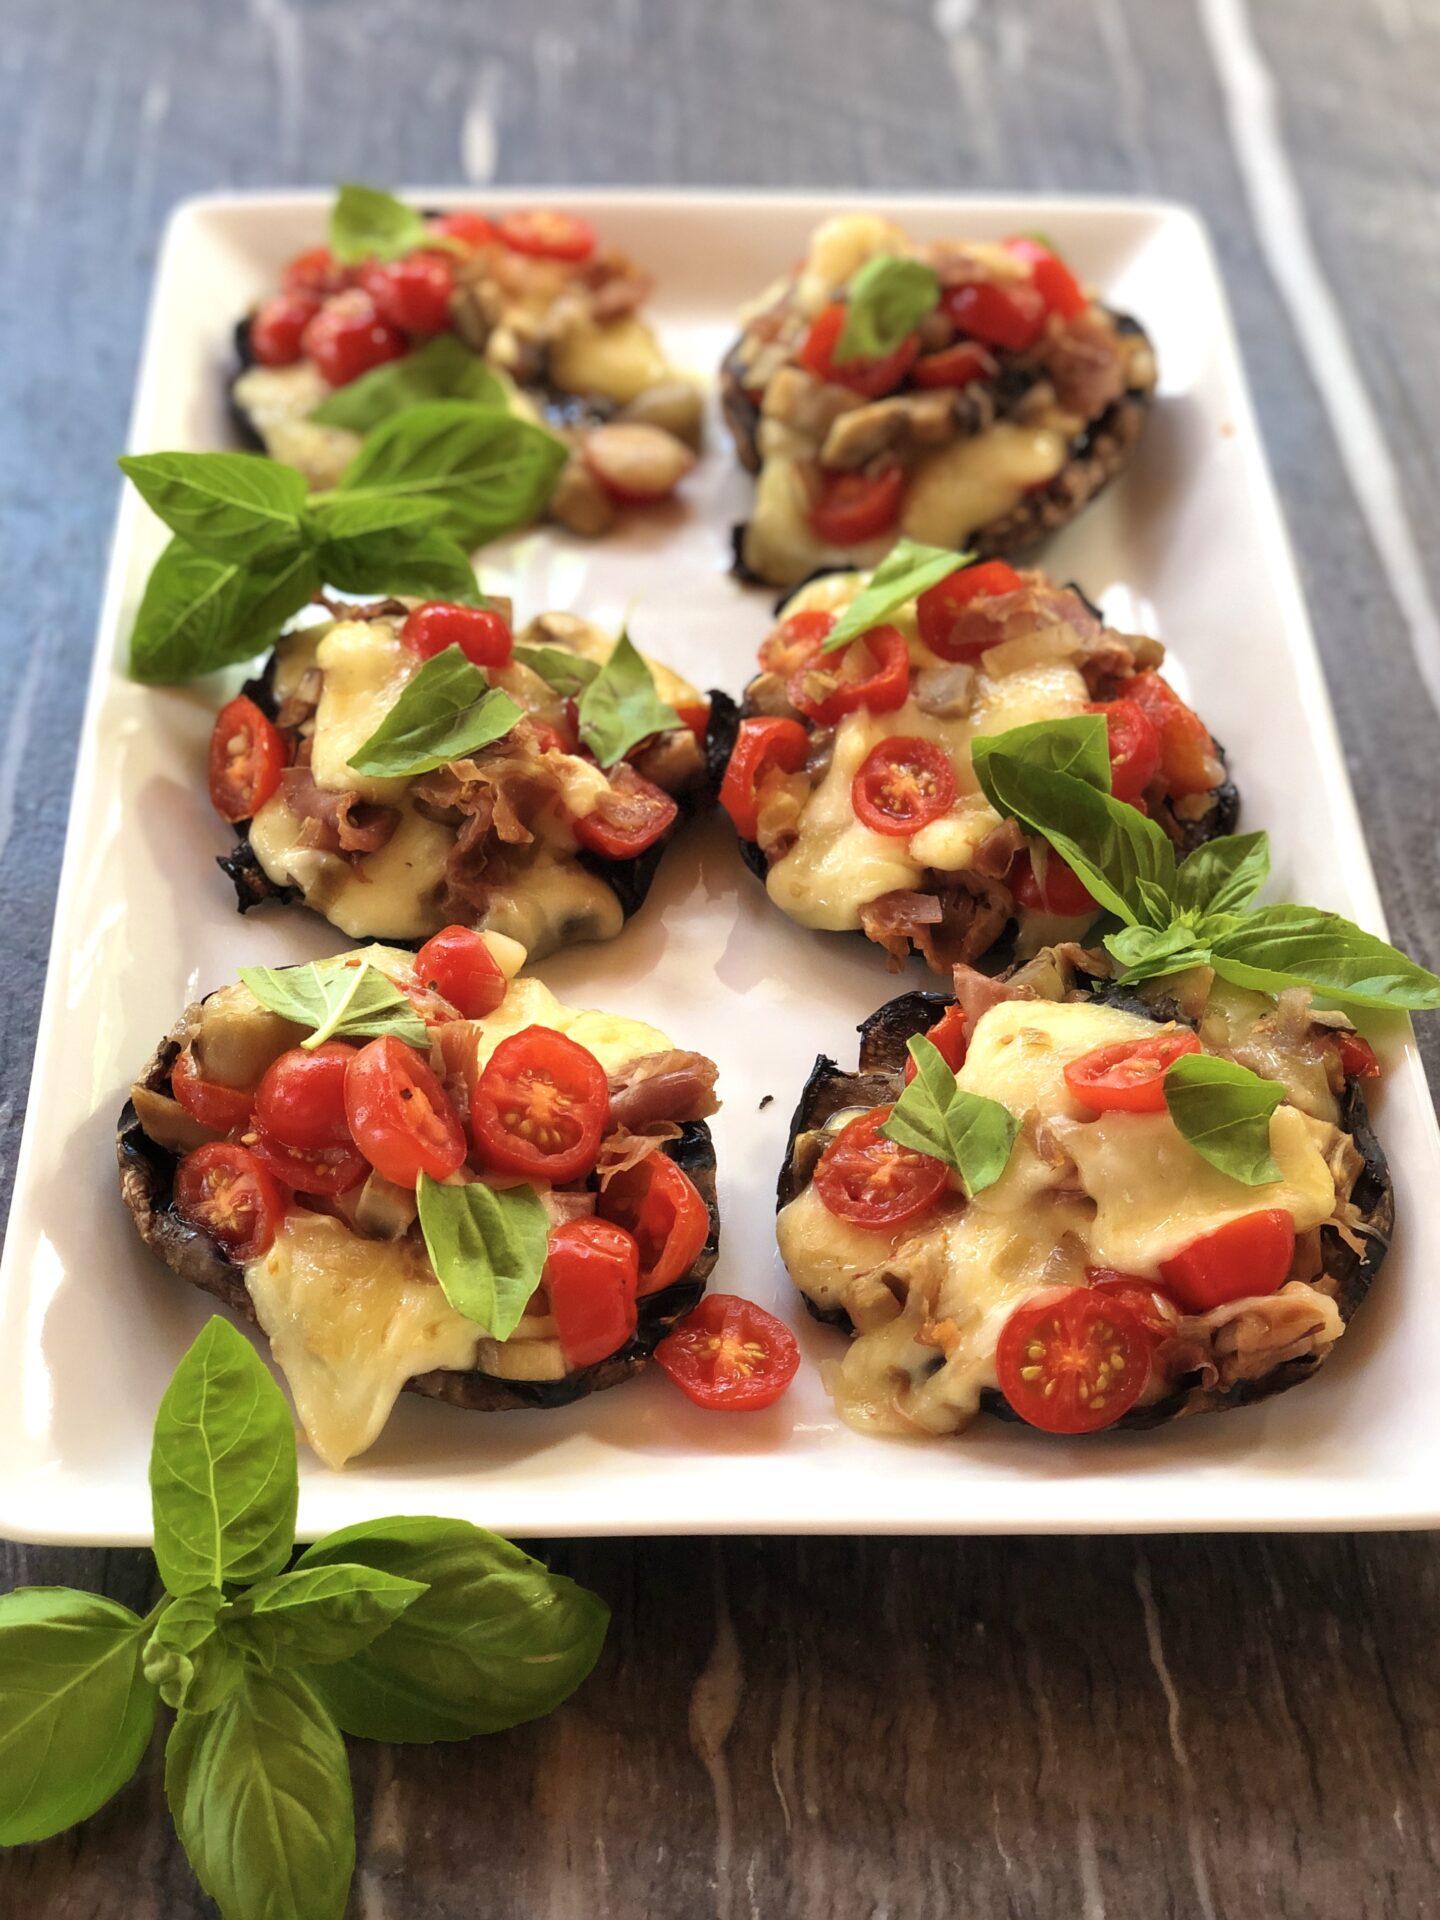 Platter of grilled stuffed portobello mushrooms with cheese, tomato and fresh basil